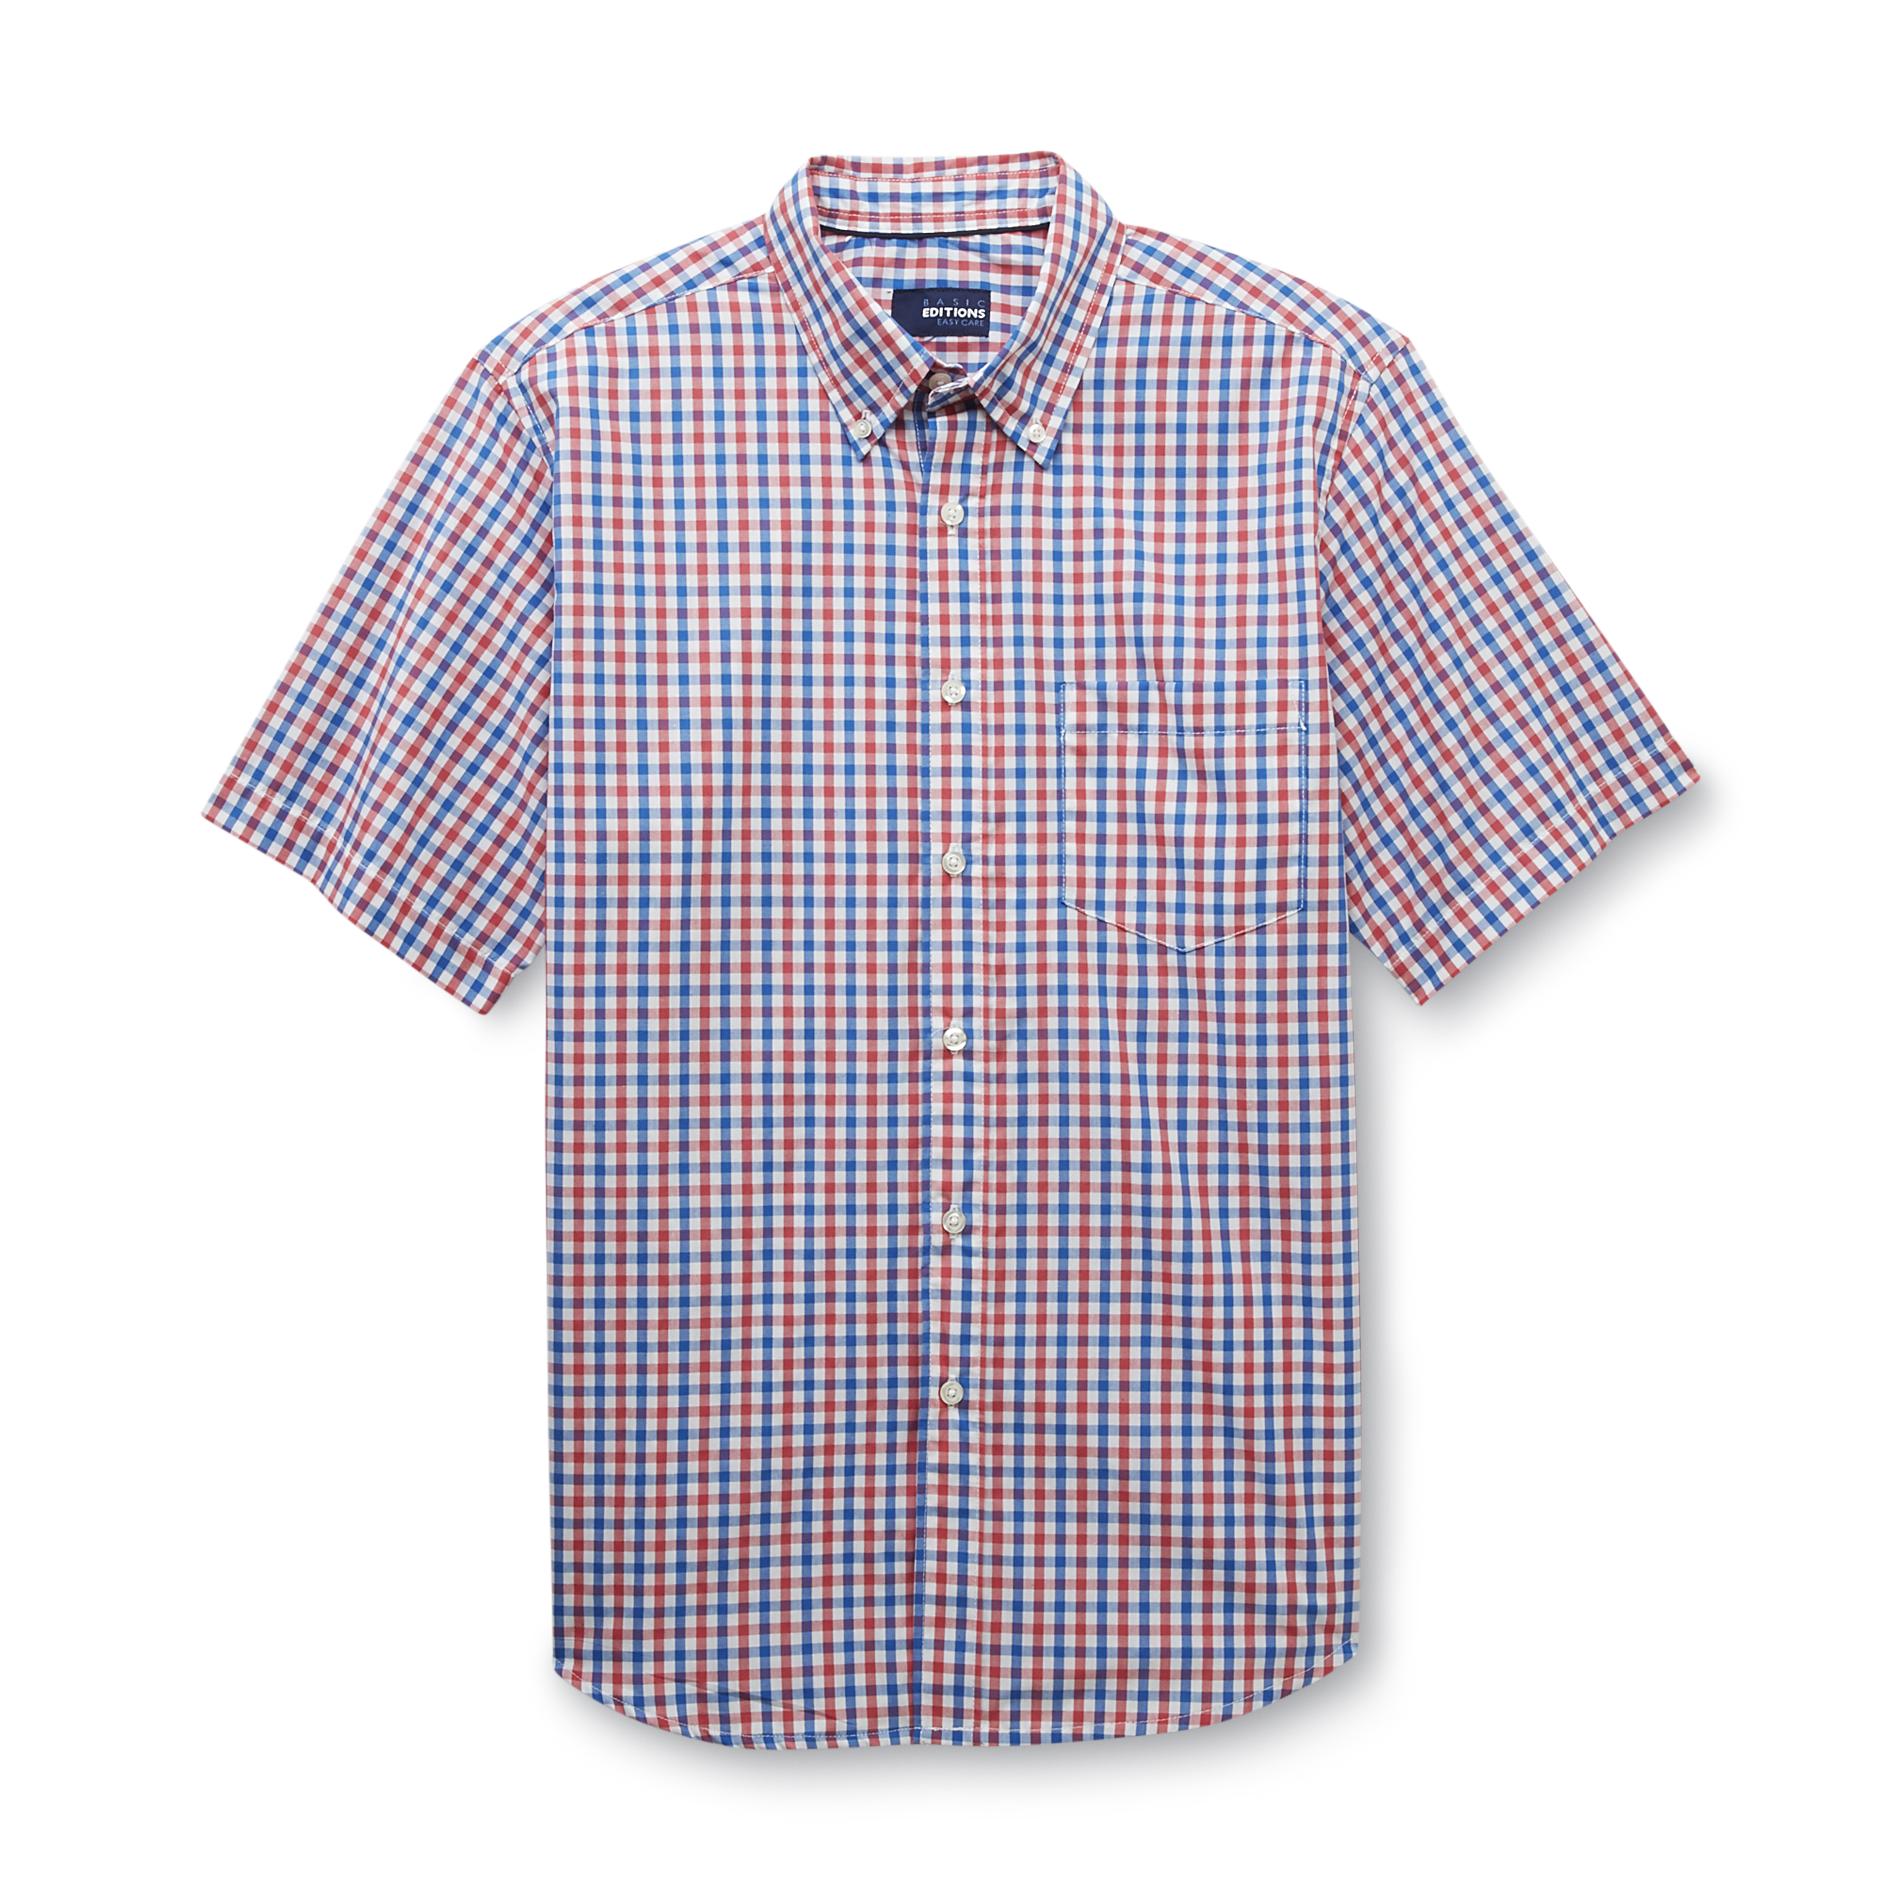 Basic Editions Men's Big & Tall Button-Front Shirt - Checked